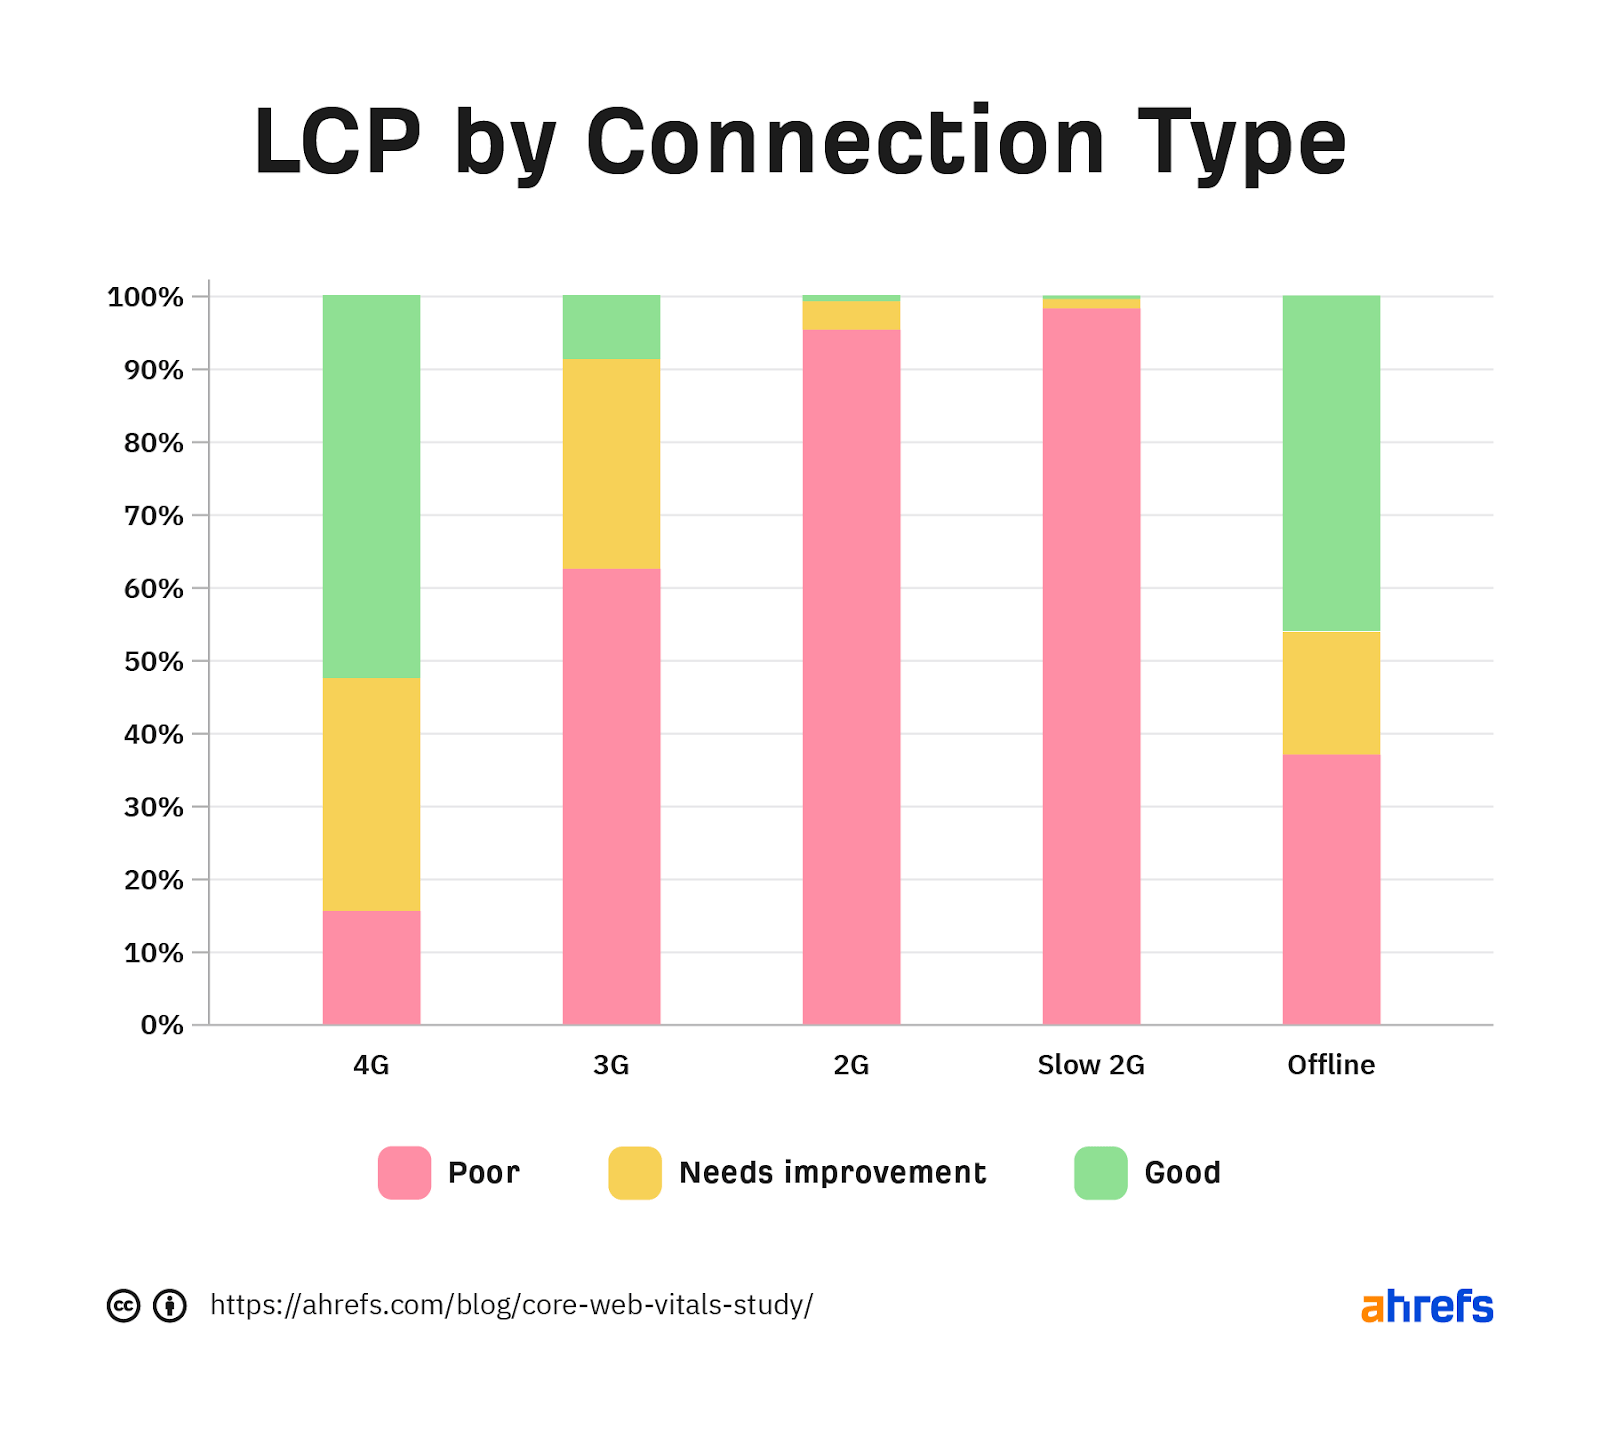 Graph showing the breakdown of the LCP by connection type